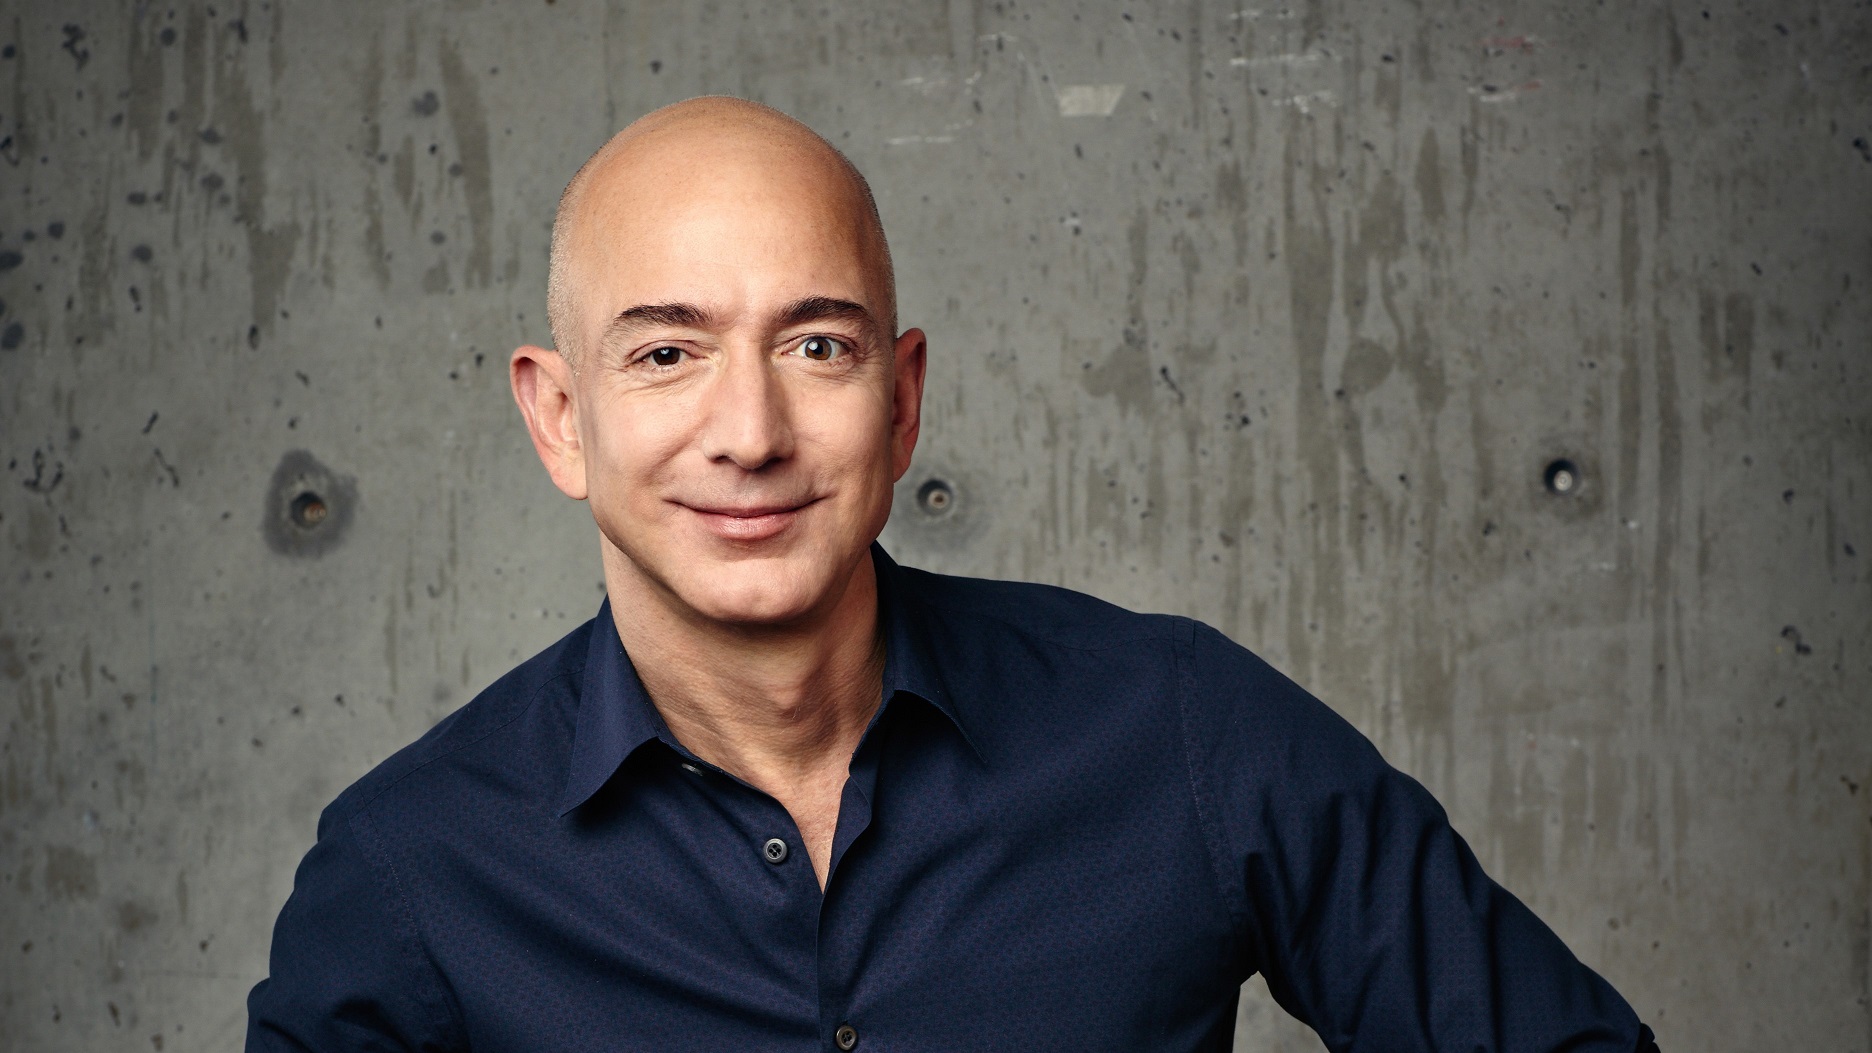 Here are some life lessons from Jeff Bezos